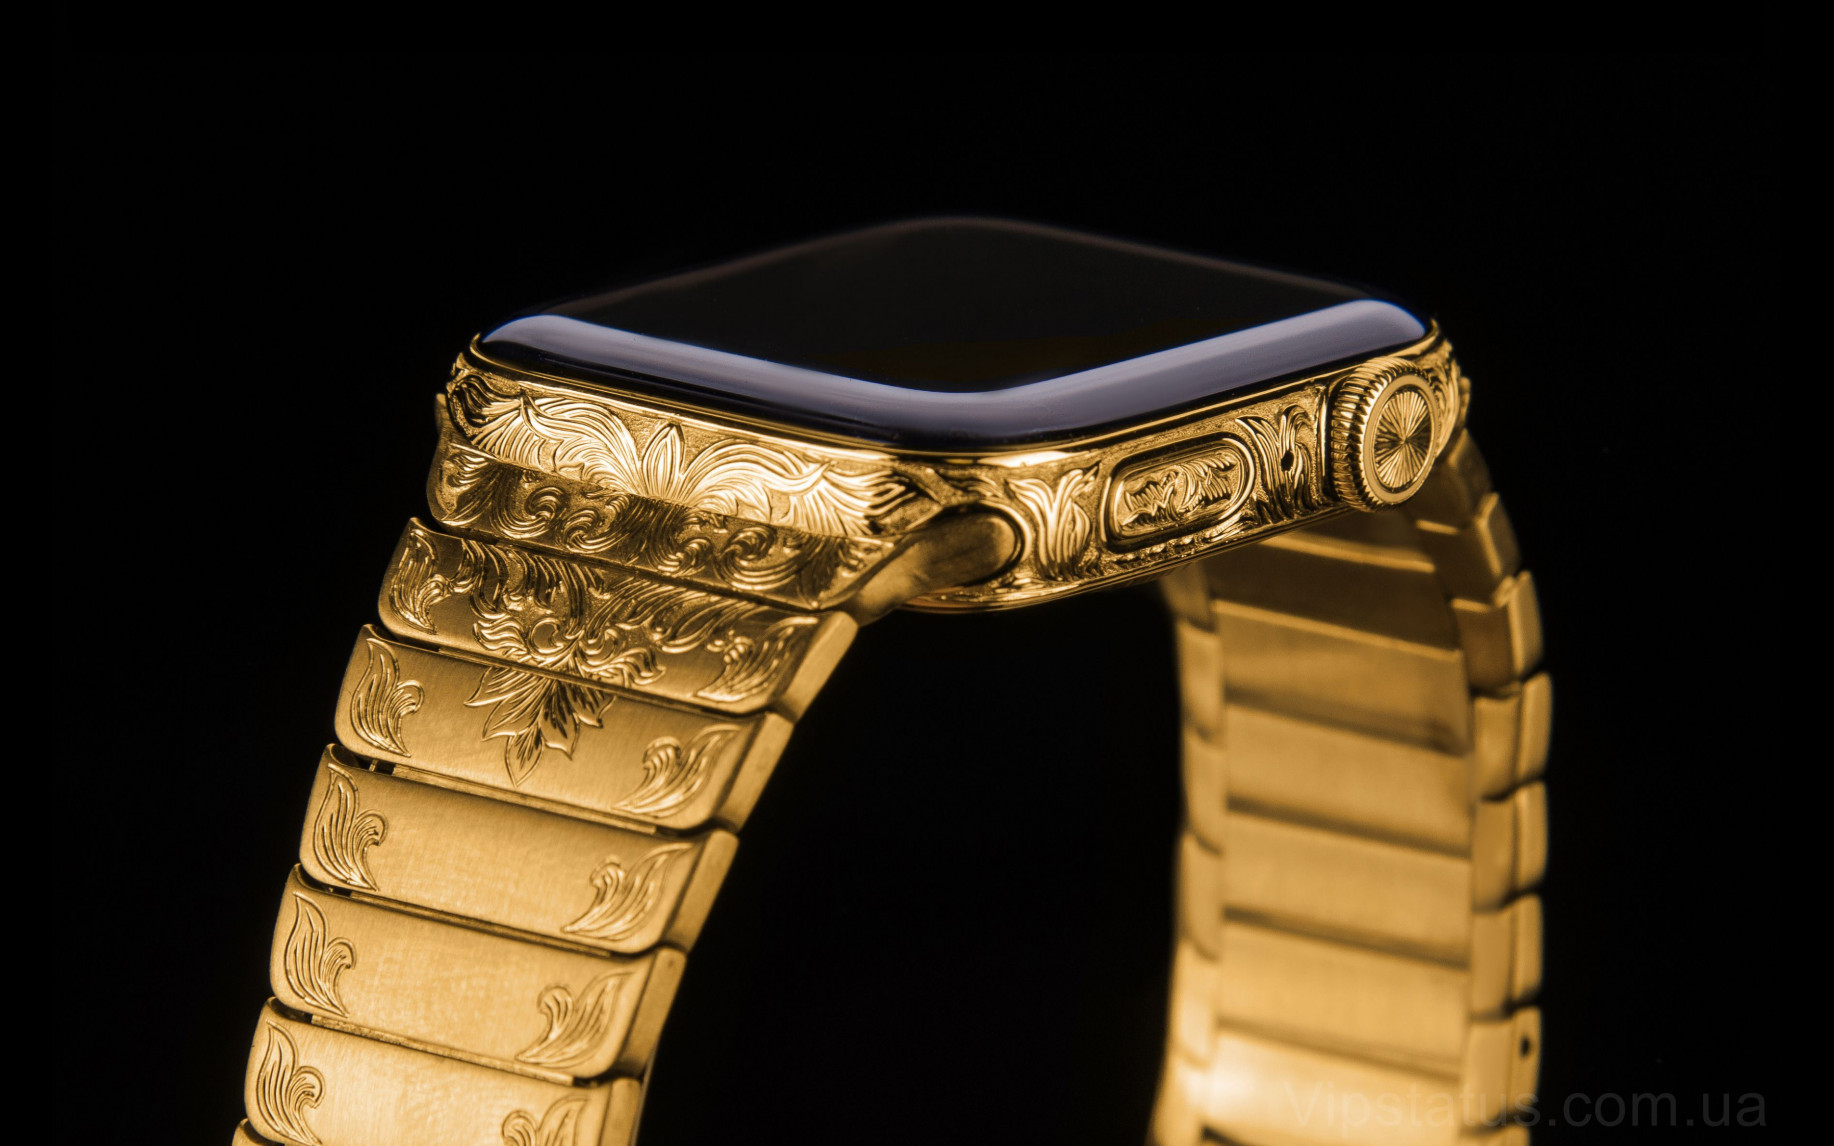 Apple watch gold stainless. Эпл вотч золото. Эпл вотч 7 золото. Эпл вотч 7 золотой. Apple IWATCH 6 золотой.